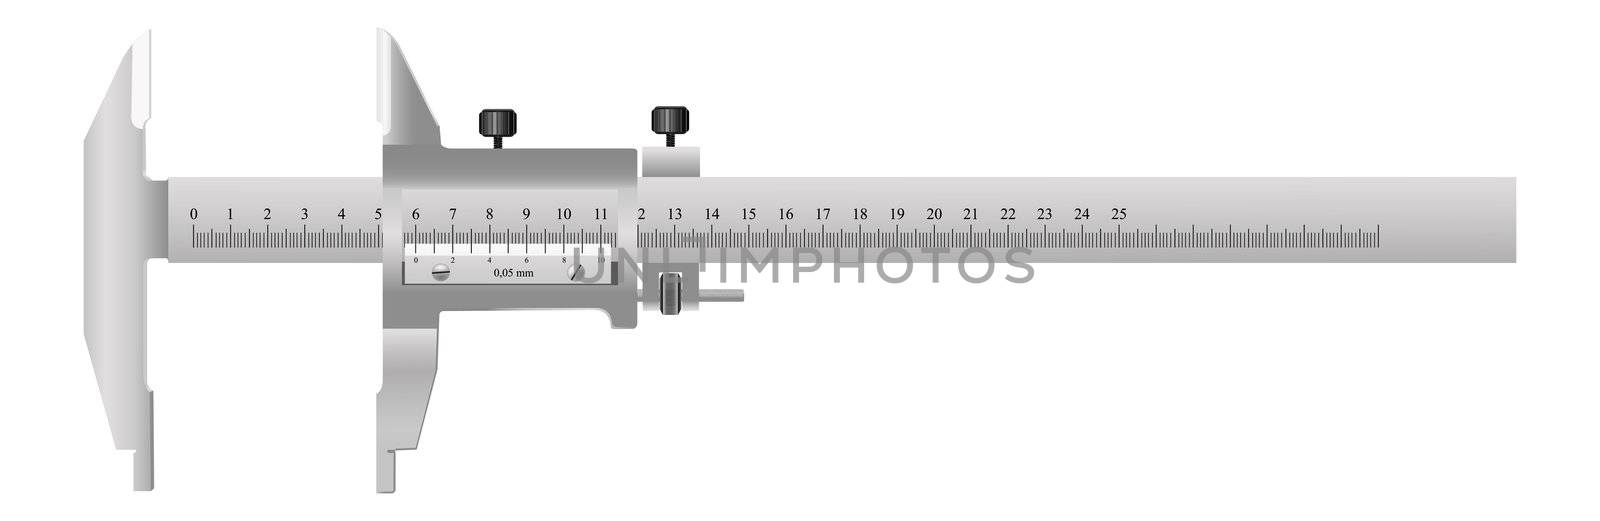 The measuring tool for quality assurance of details in mechanical engineering and in other manufactures